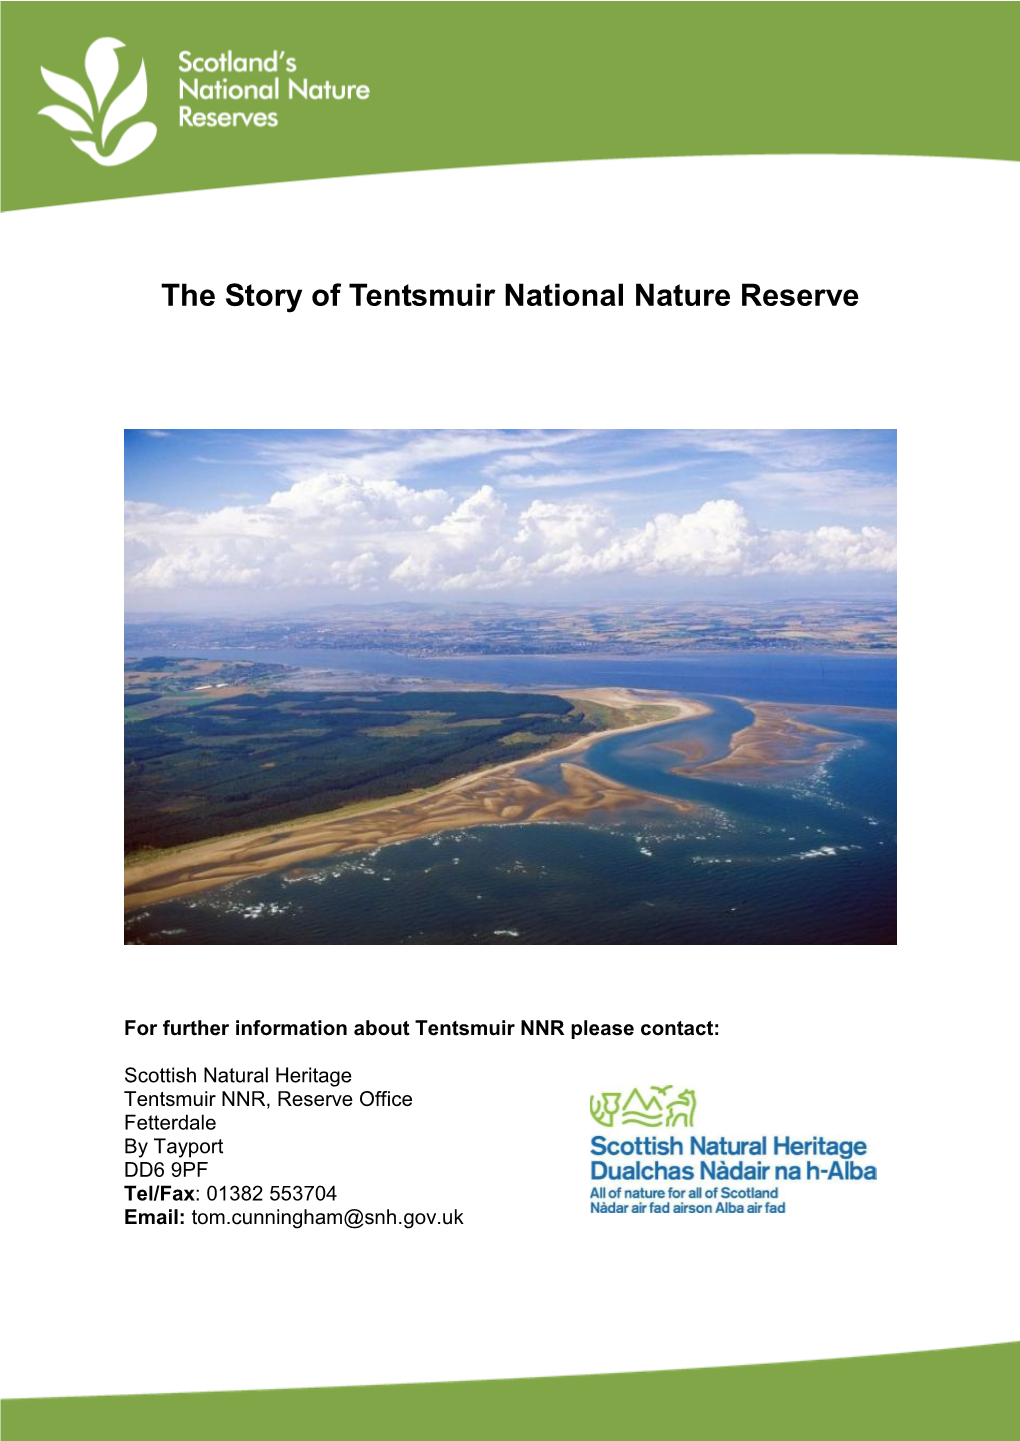 The Story of Tentsmuir Point and Morton Lochs